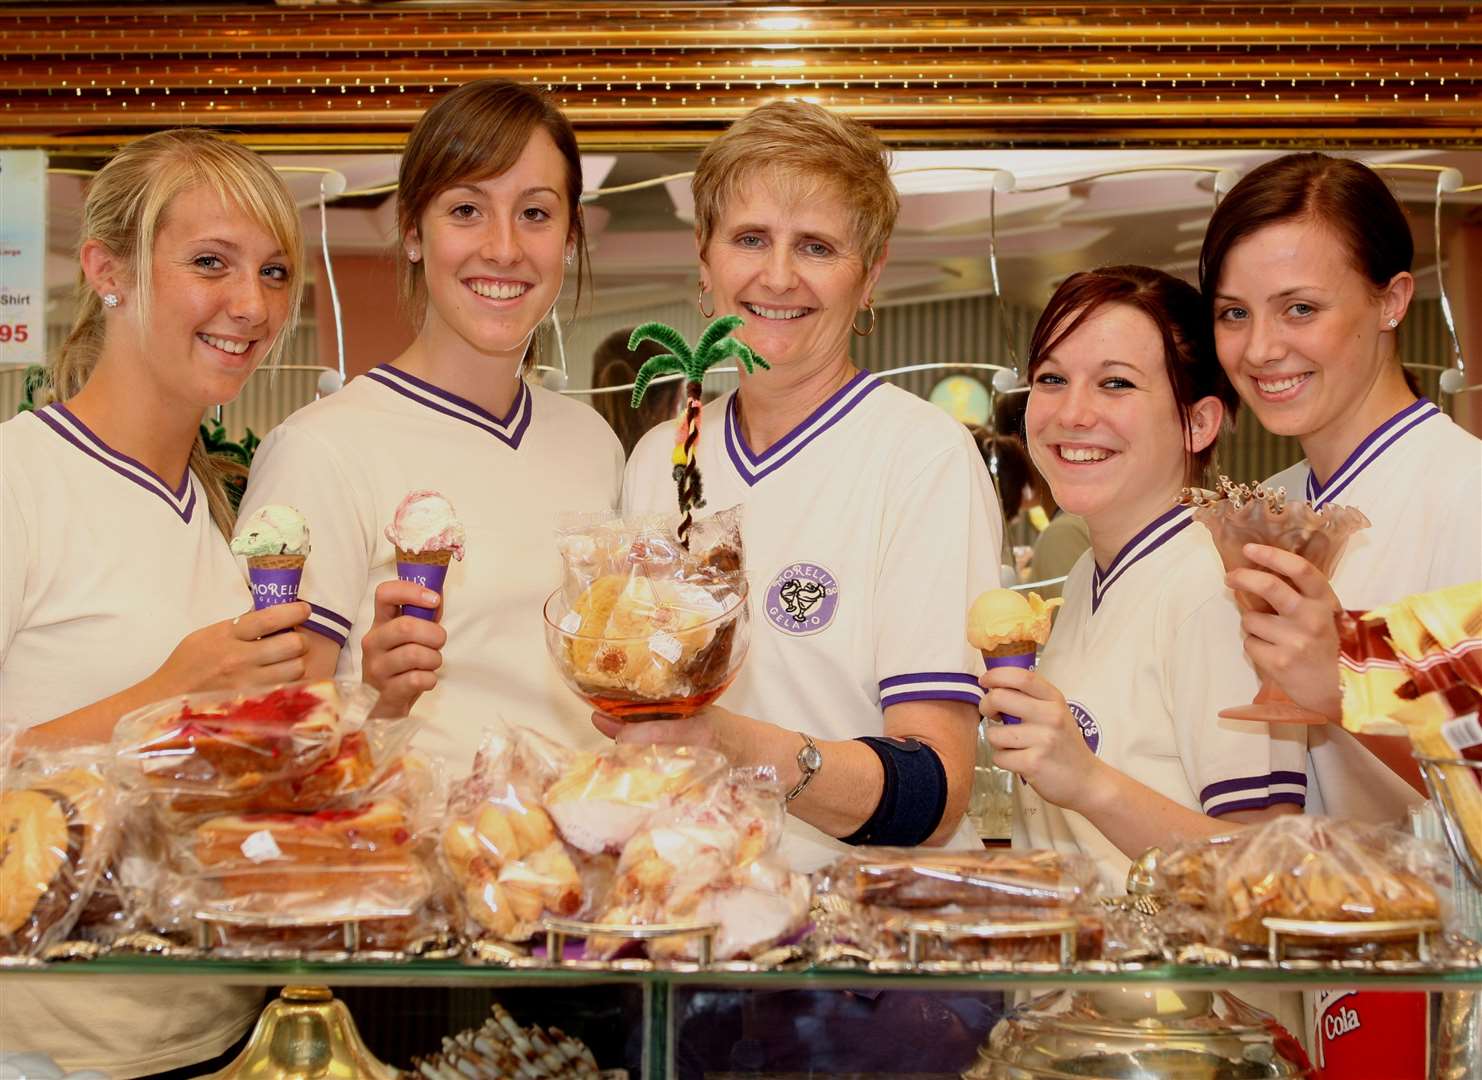 Morelli employee's Danielle Pearce, Vicky Jordan, Ann Duffy, Sarah Johnson and Jodie Gee in 2007. Picture by Phil Medgett